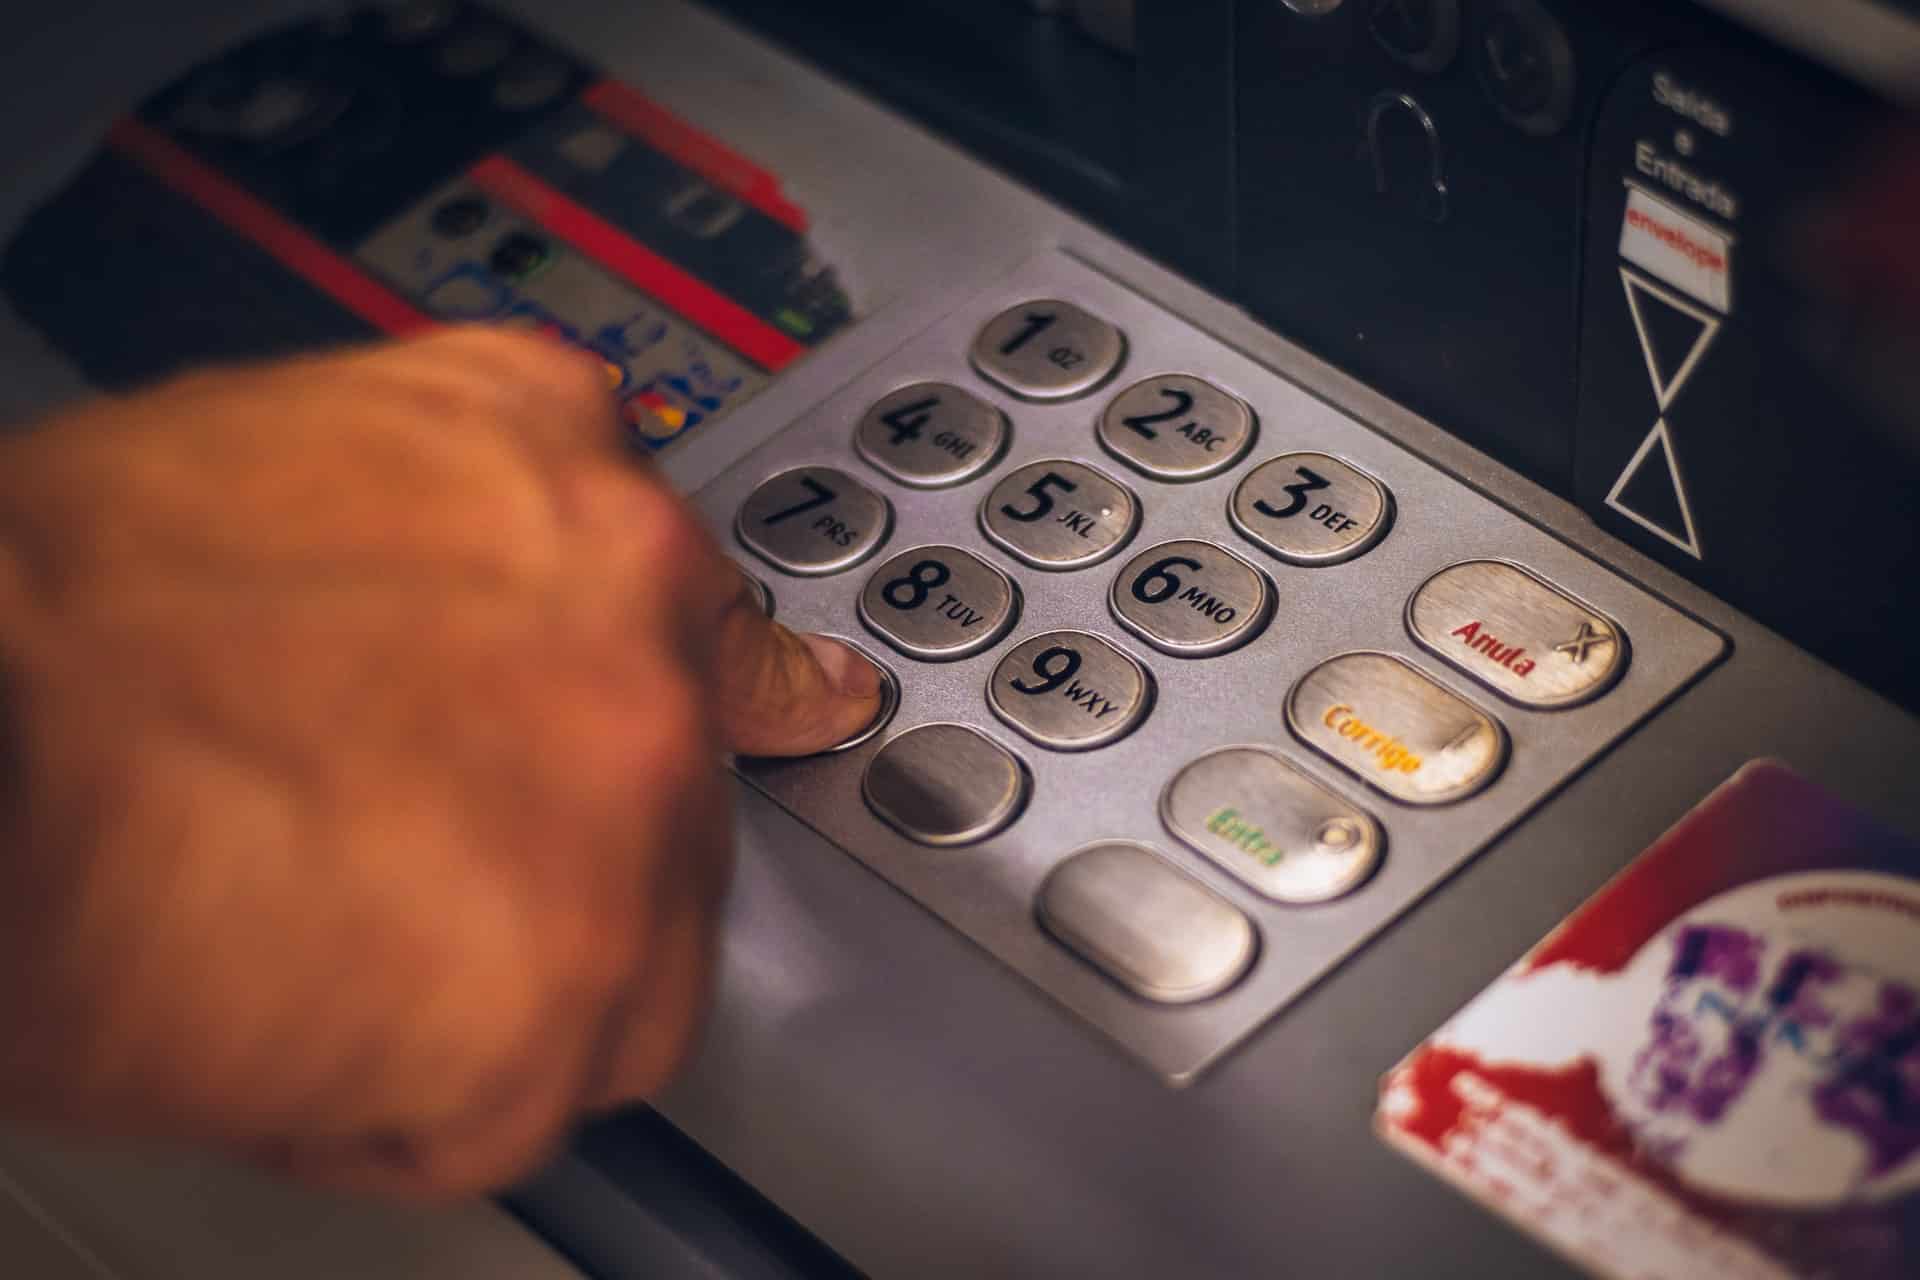 Photo of a right hand pressing down the numbers of an ATM PIN pad.